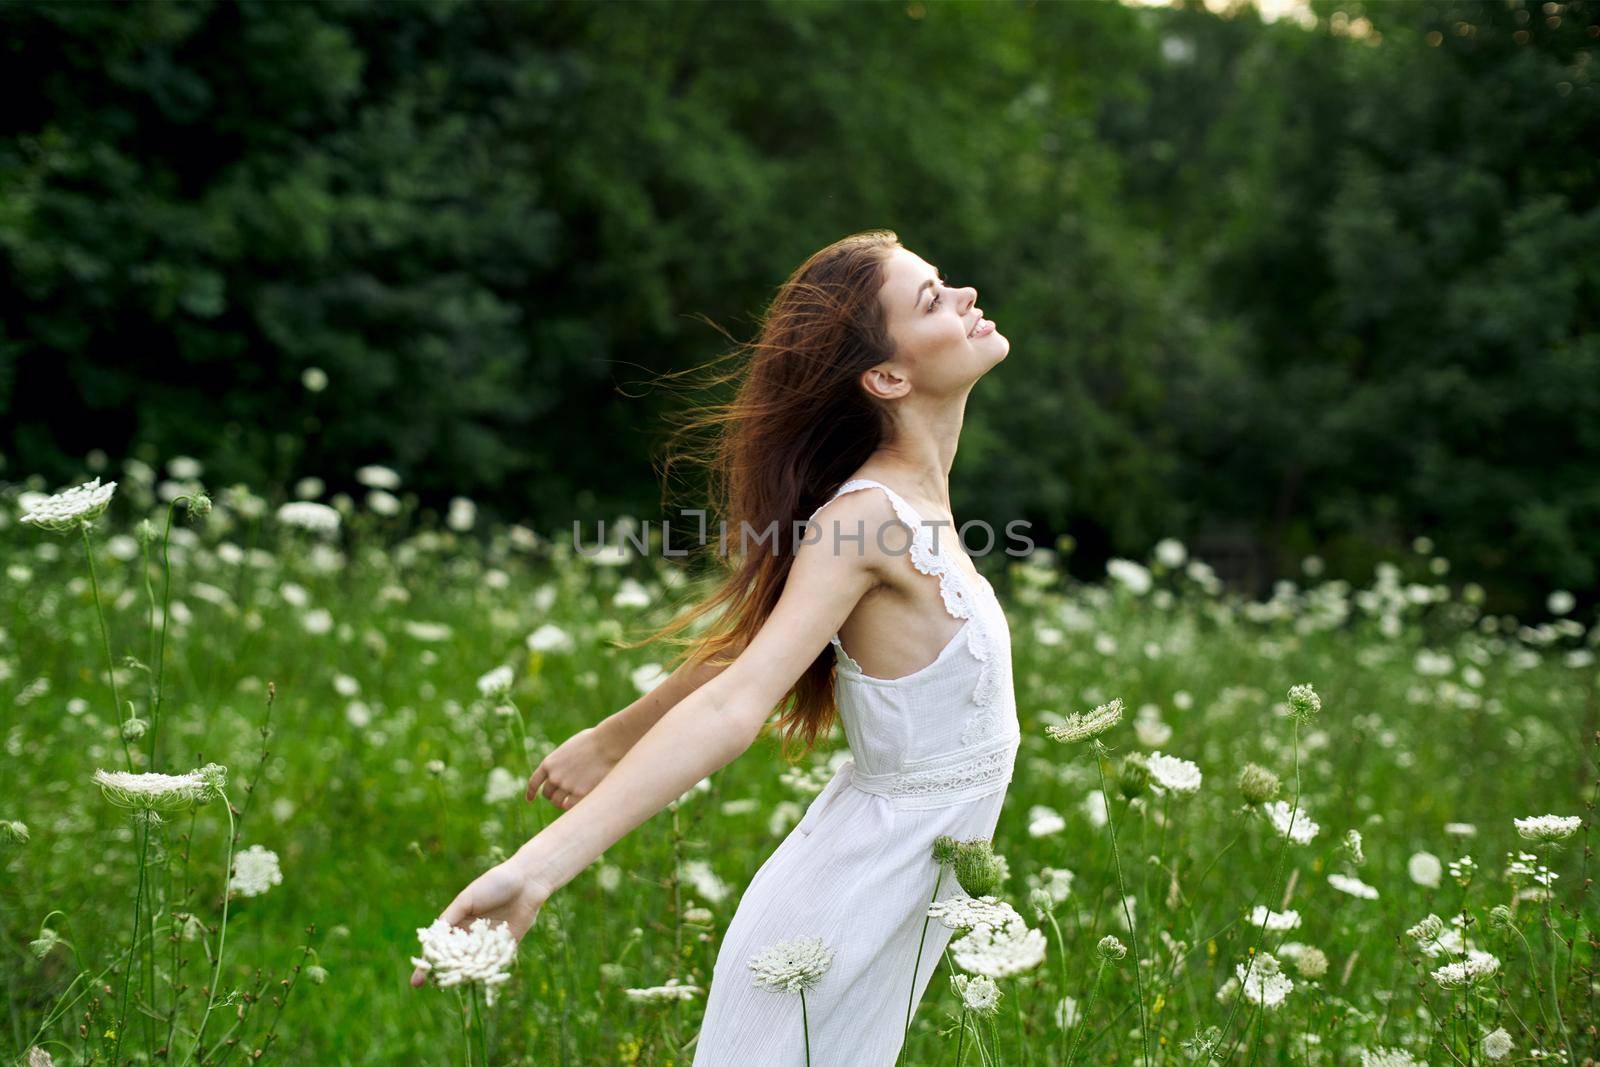 cheerful woman outdoors flowers freedom summer nature by Vichizh